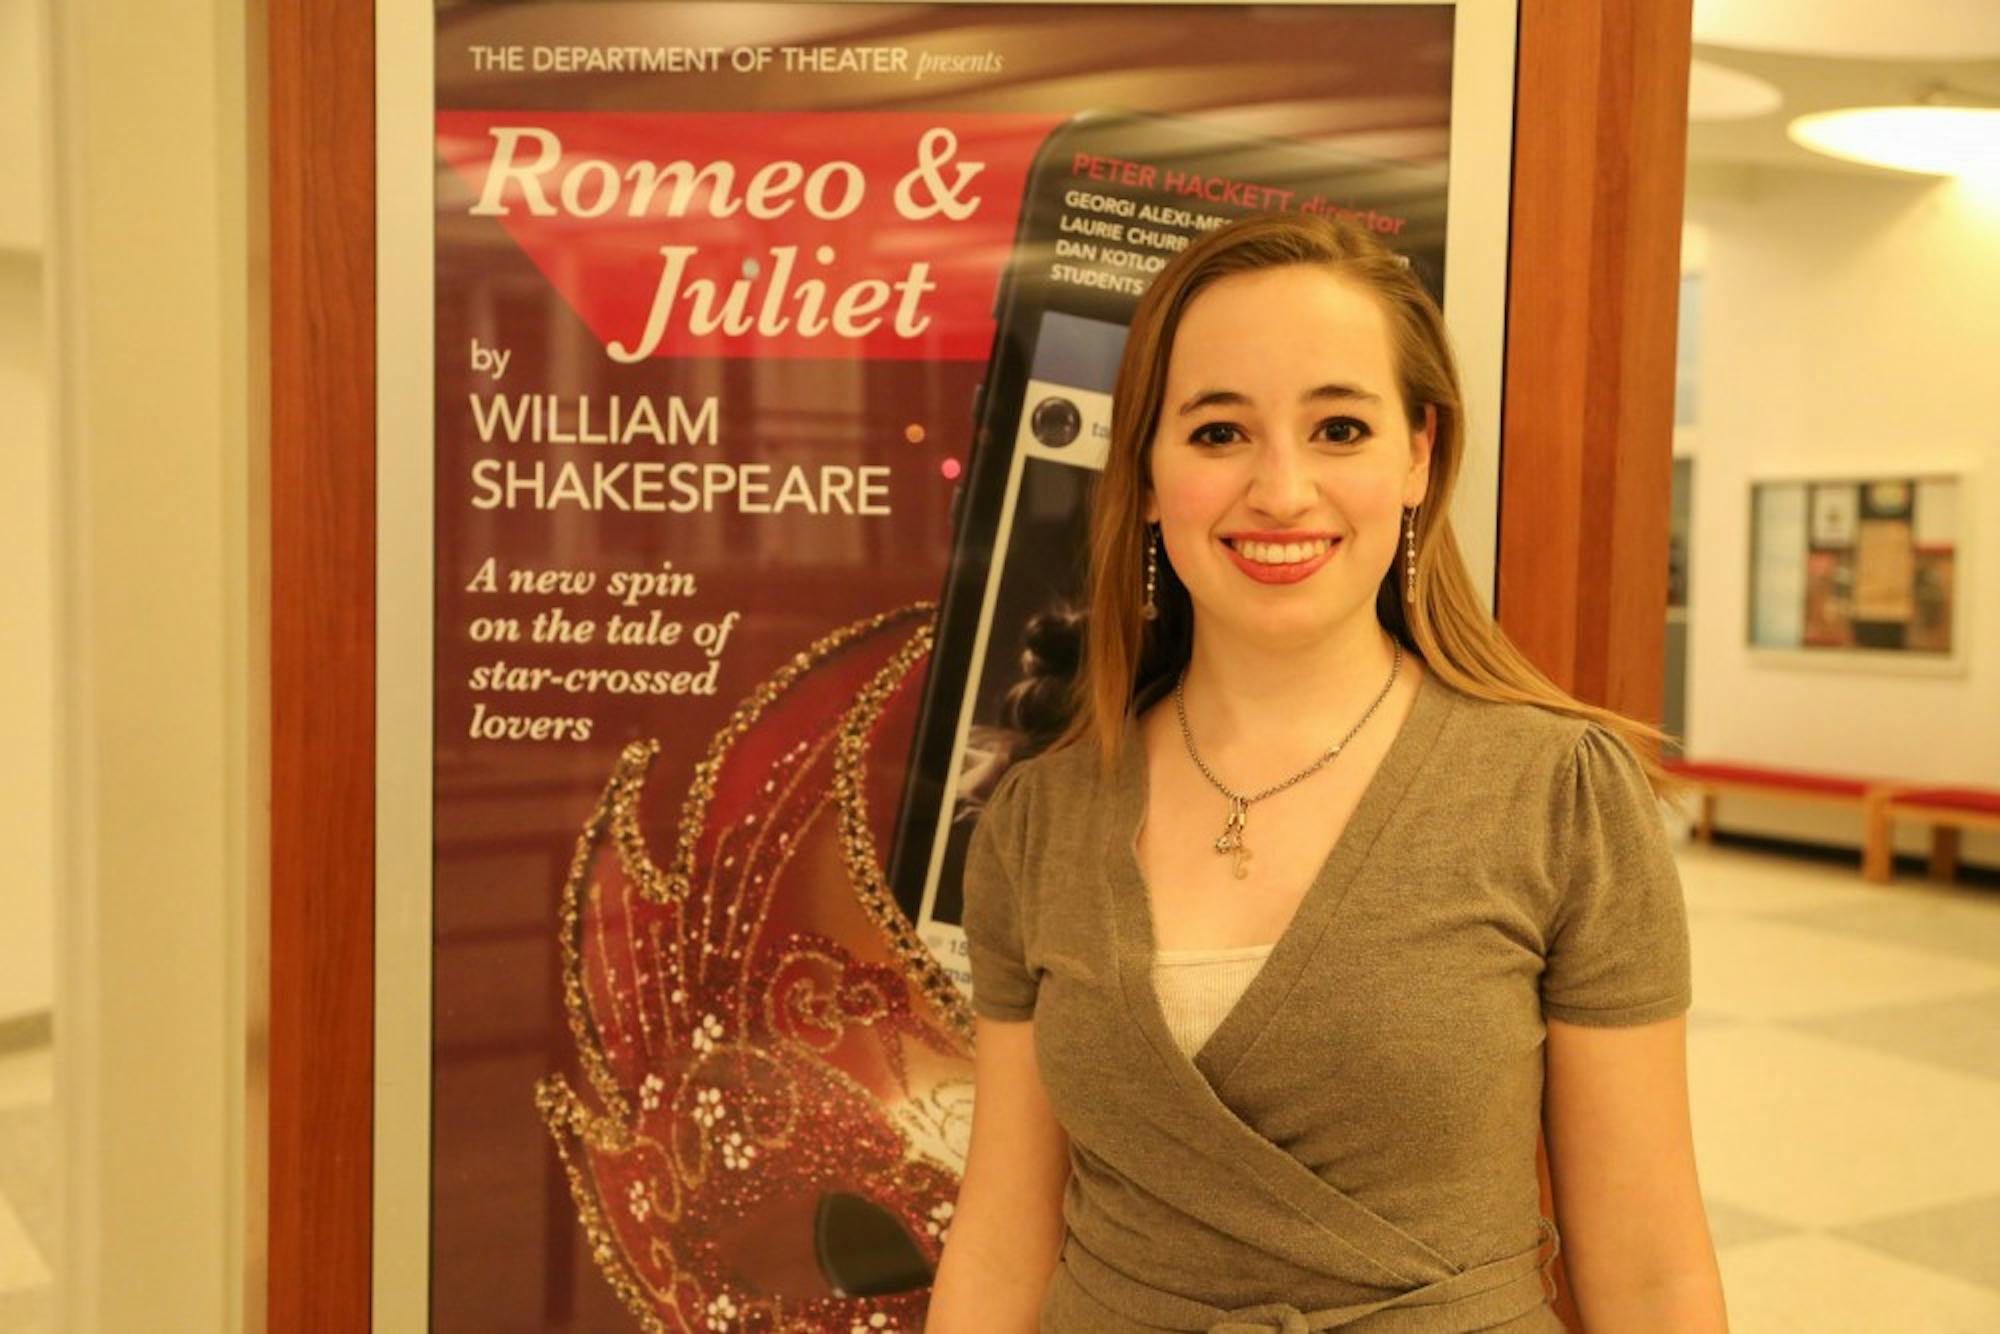 Tess McGuinness ’18 said that playing Juliet gave her a new perspective on the classic “Romeo and Juliet.”